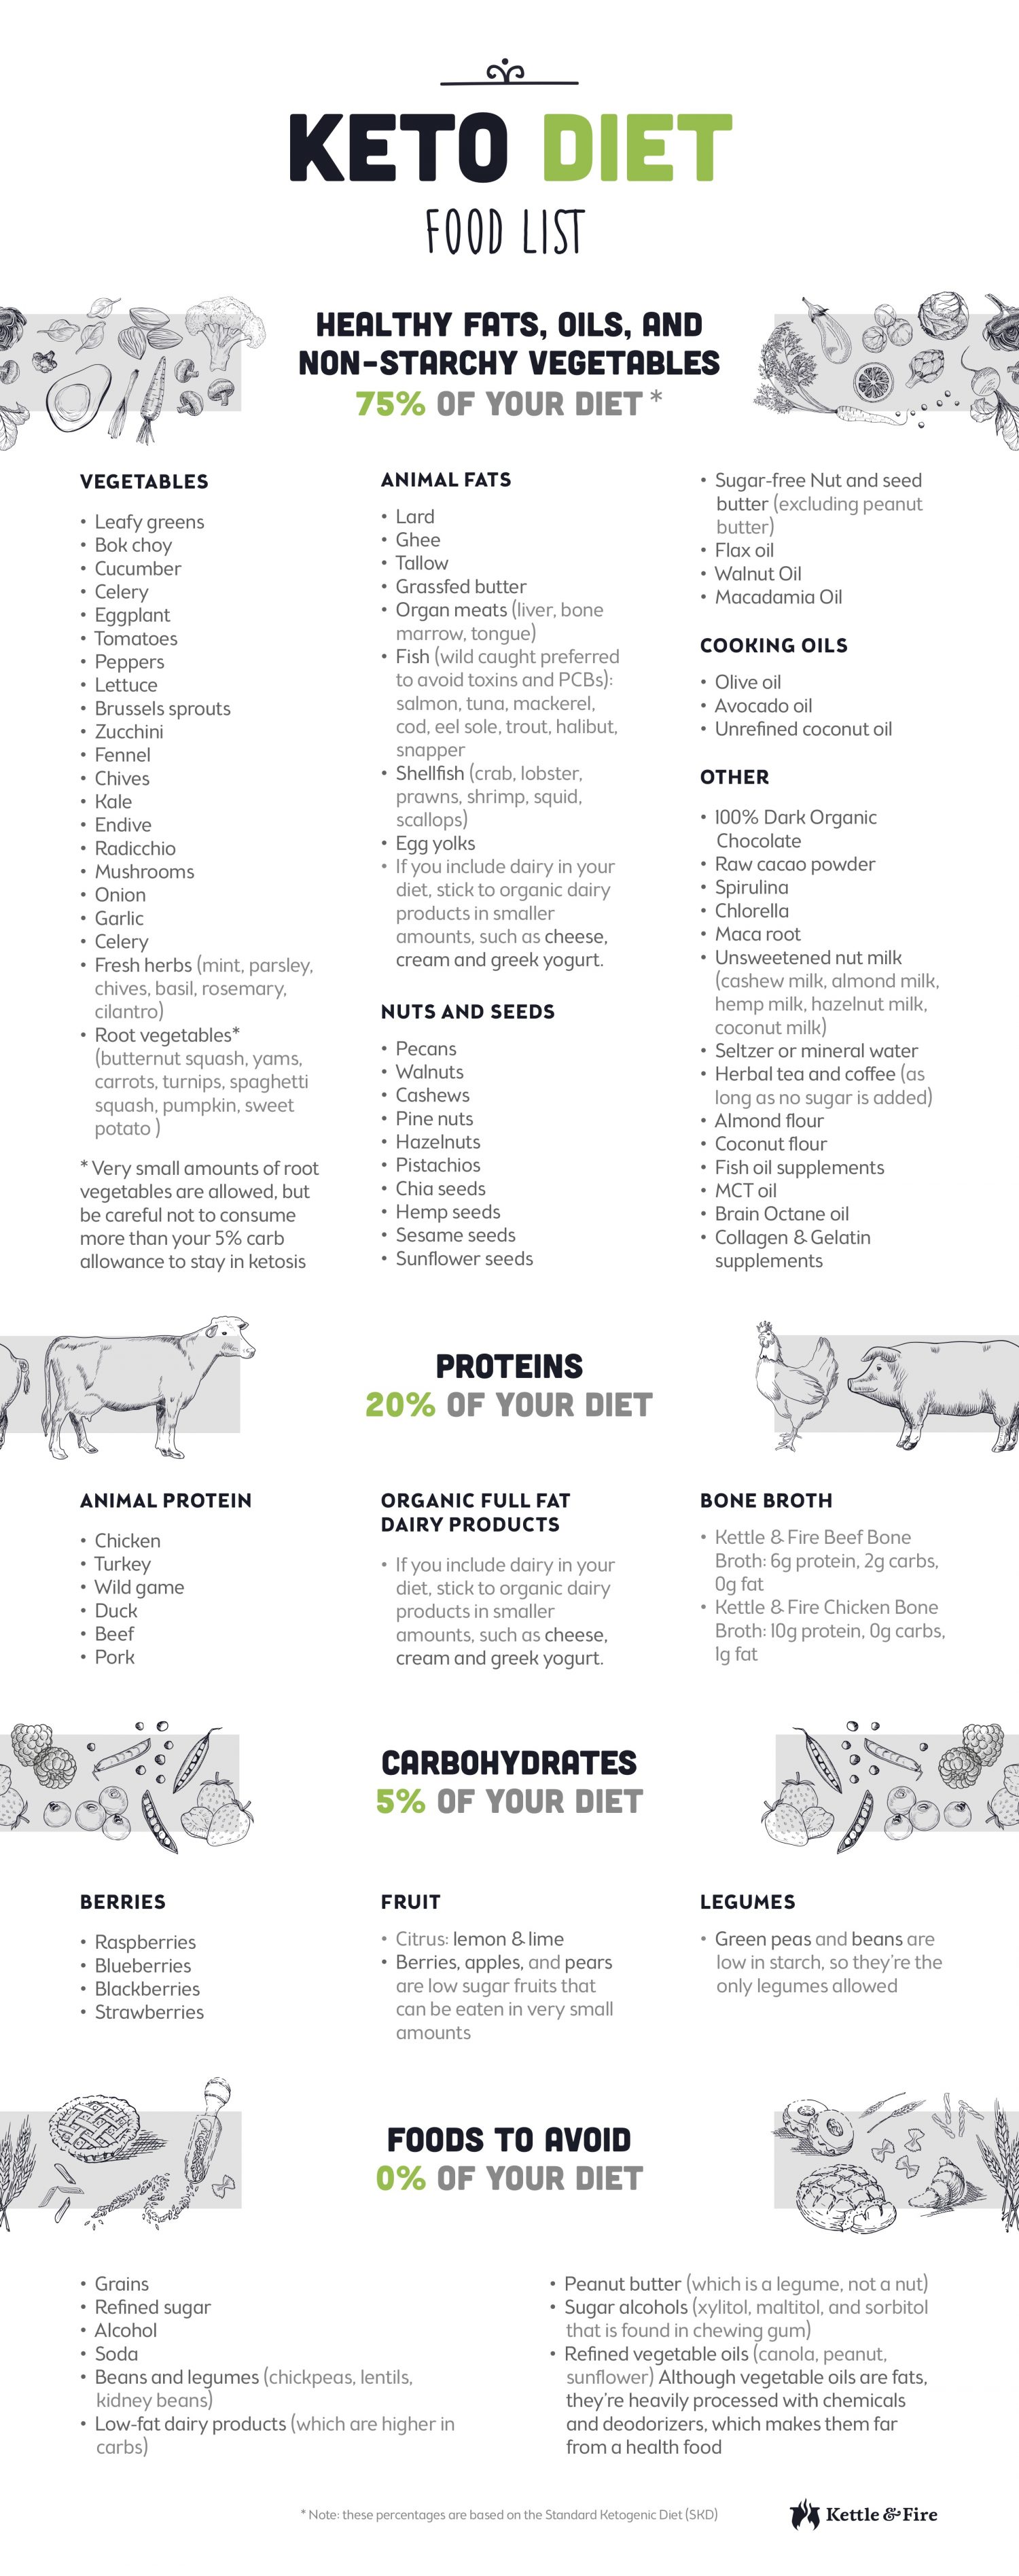 A detailed keto diet food list to help guide your choices when it comes to grocery shopping, meal prep, and eating out at restaurants.